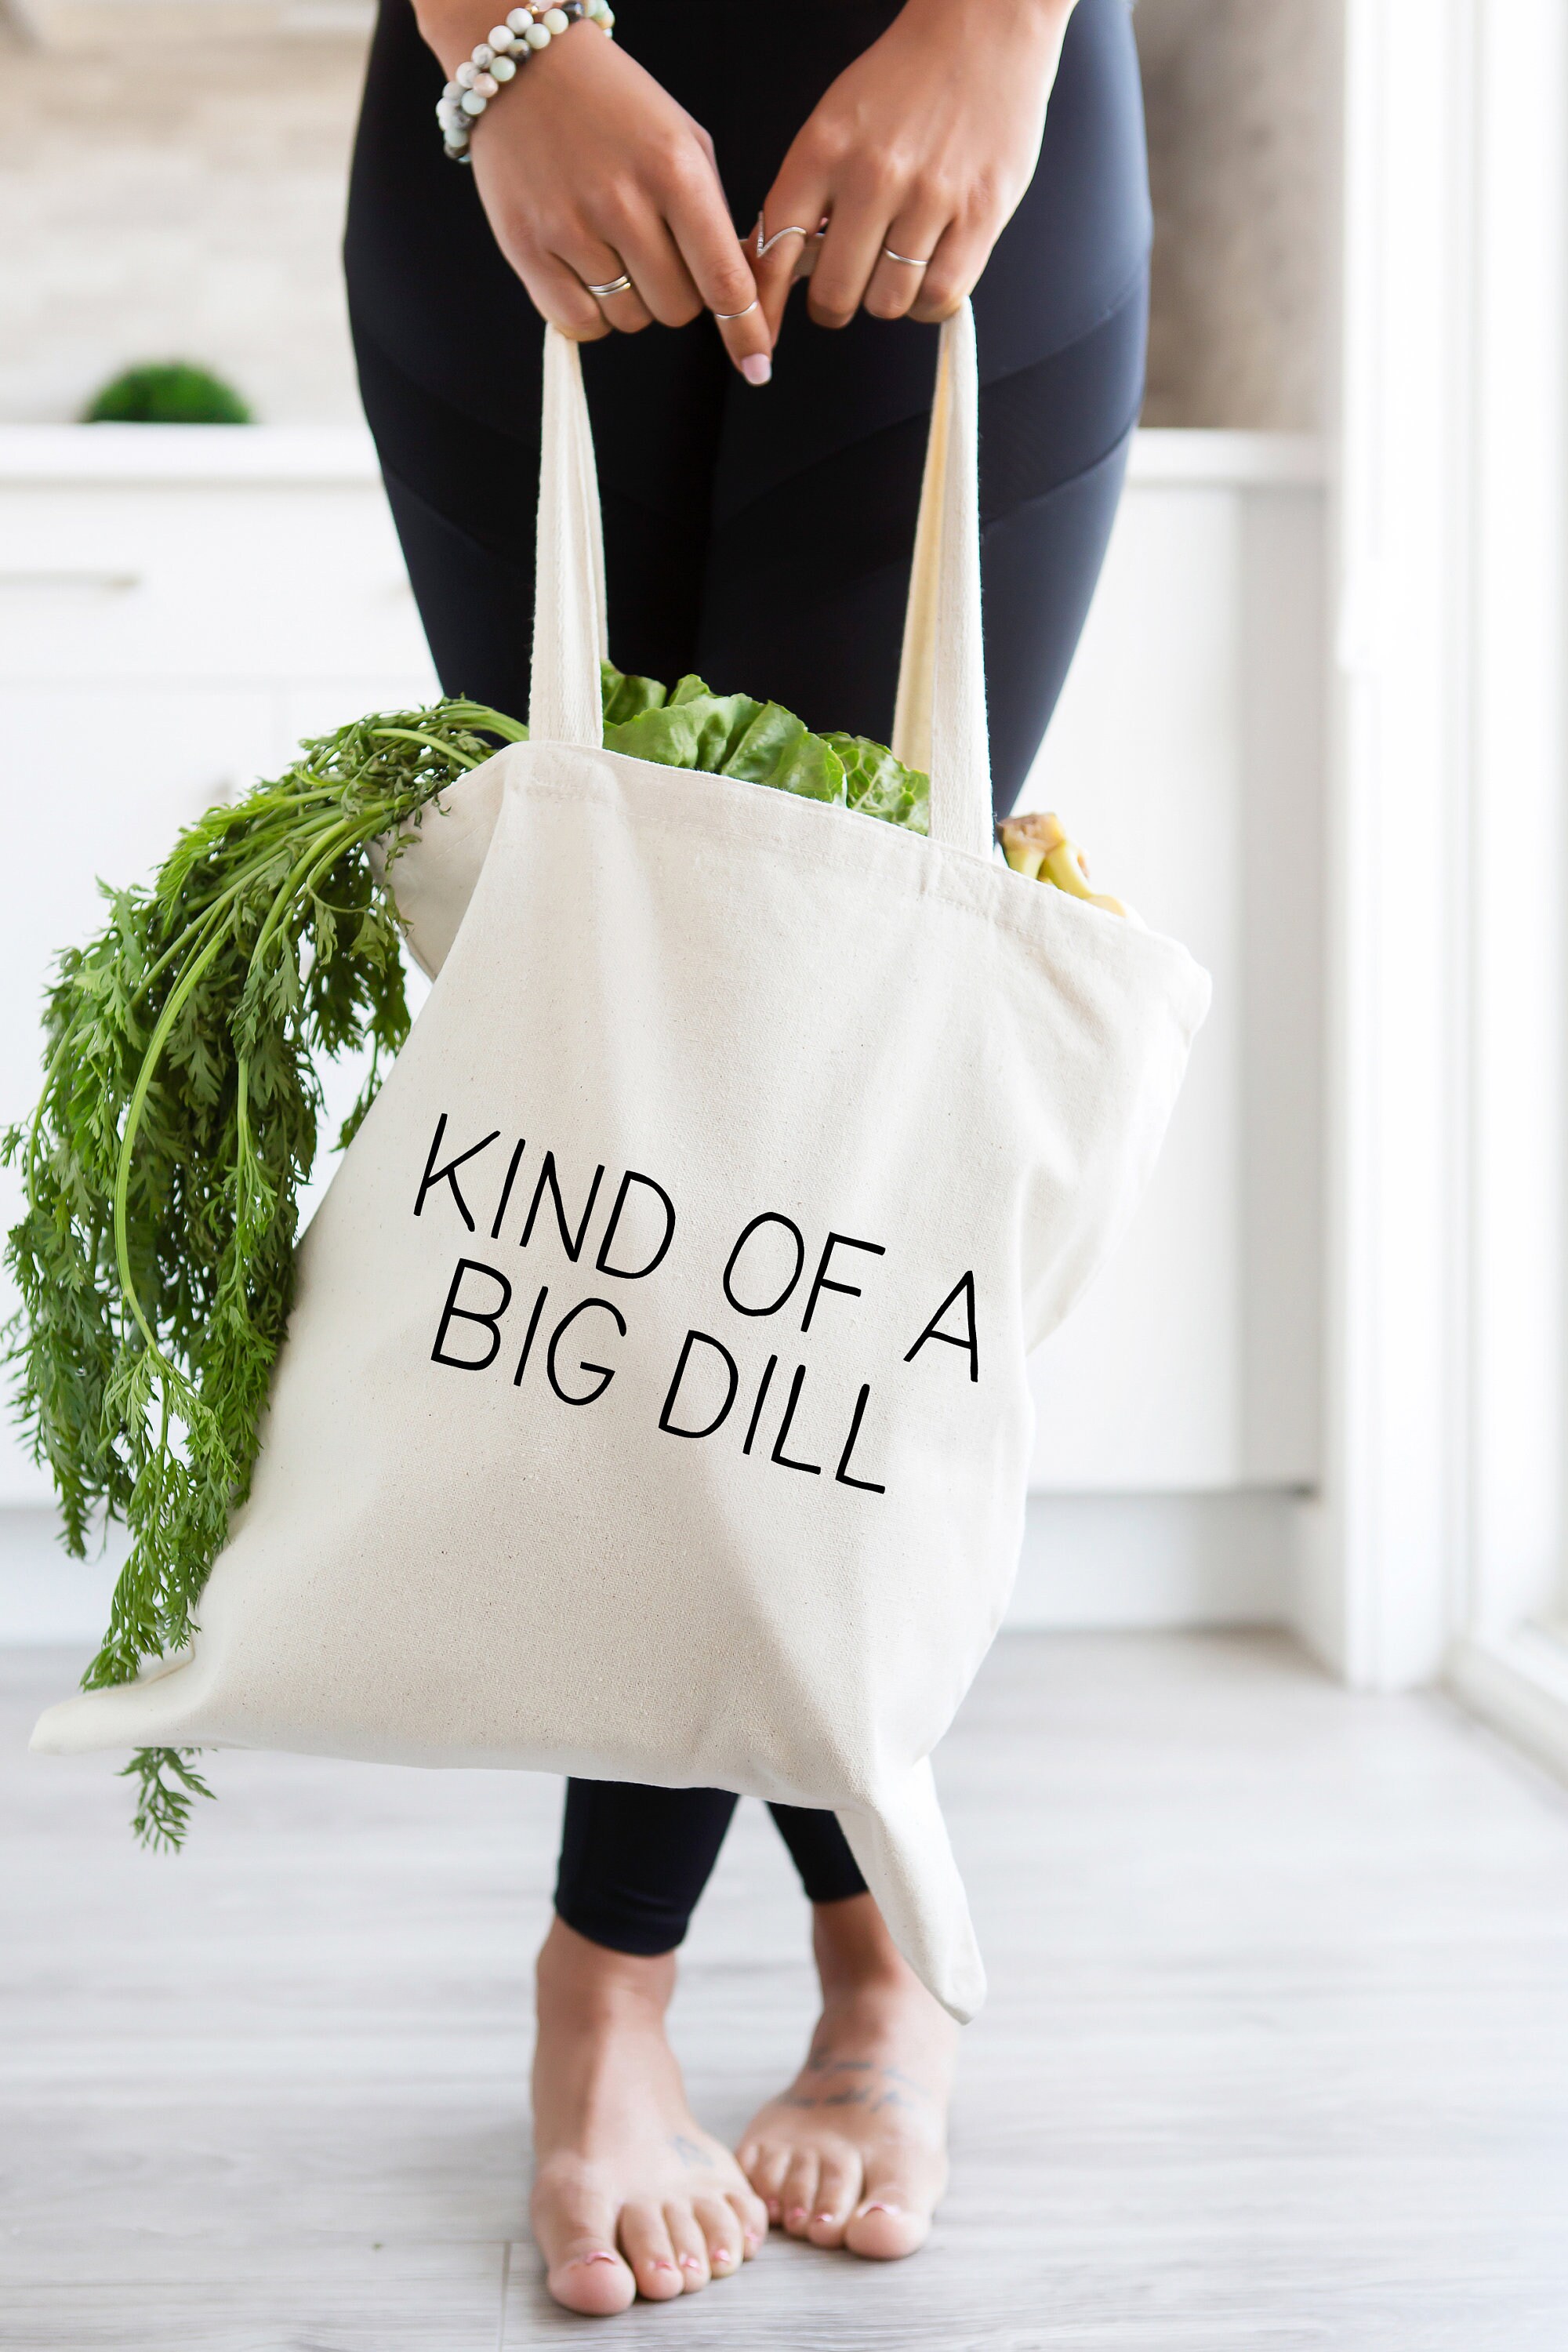 2 Large Vegetable Vegetarian 16.5" X 16.5" Reusable Eco Shopping Tote Bags 